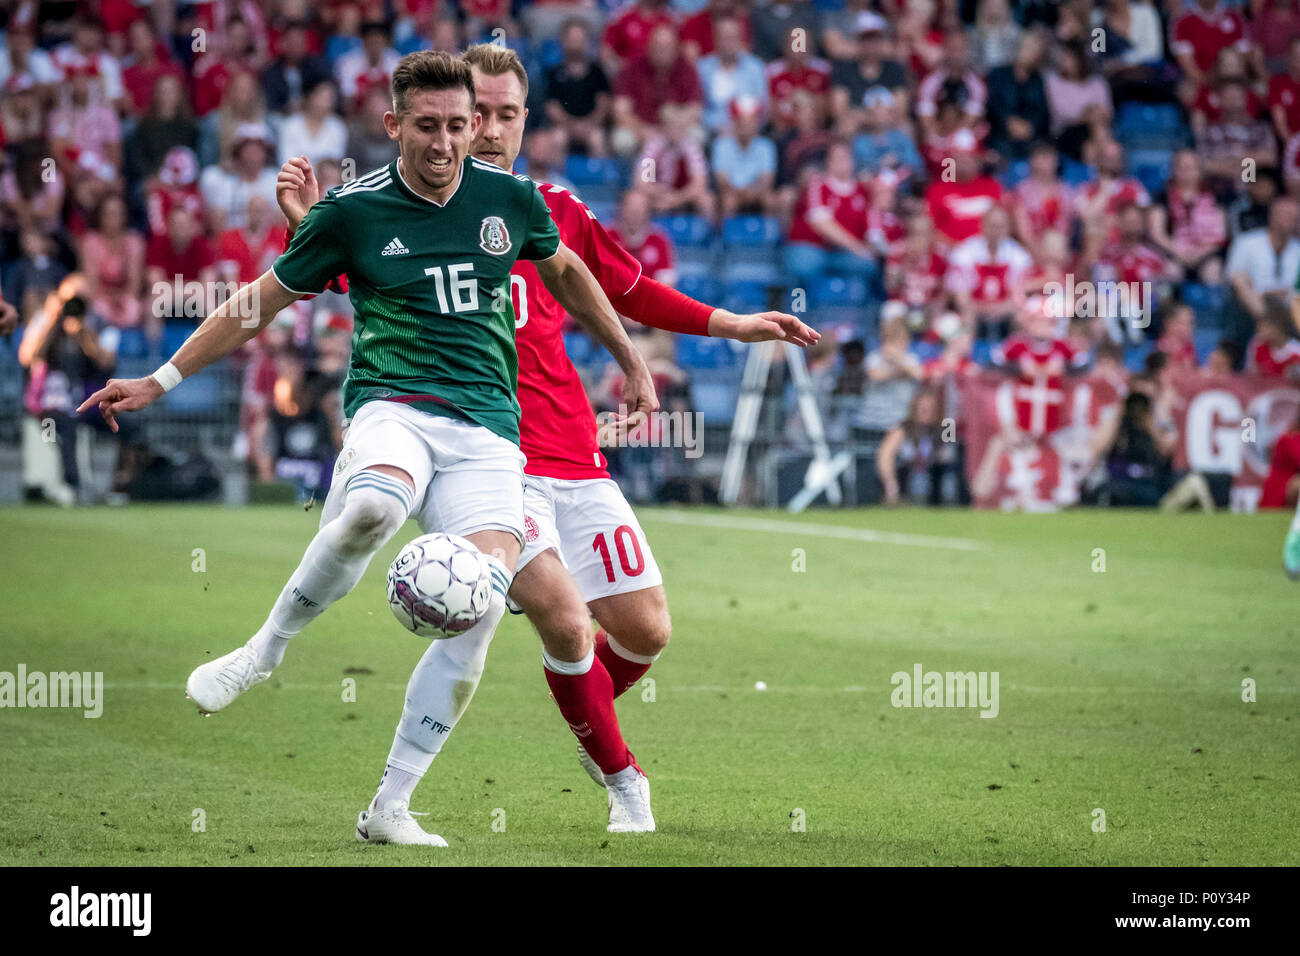 Denmark, Brøndby - June 09, 2018. Hector Herrera (16) of Mexico seen during the football friendly between Denmark and Mexico at Brøndby Stadion. (Photo credit: Gonzales Photo - Kim M. Leland). Credit: Gonzales Photo/Alamy Live News Stock Photo